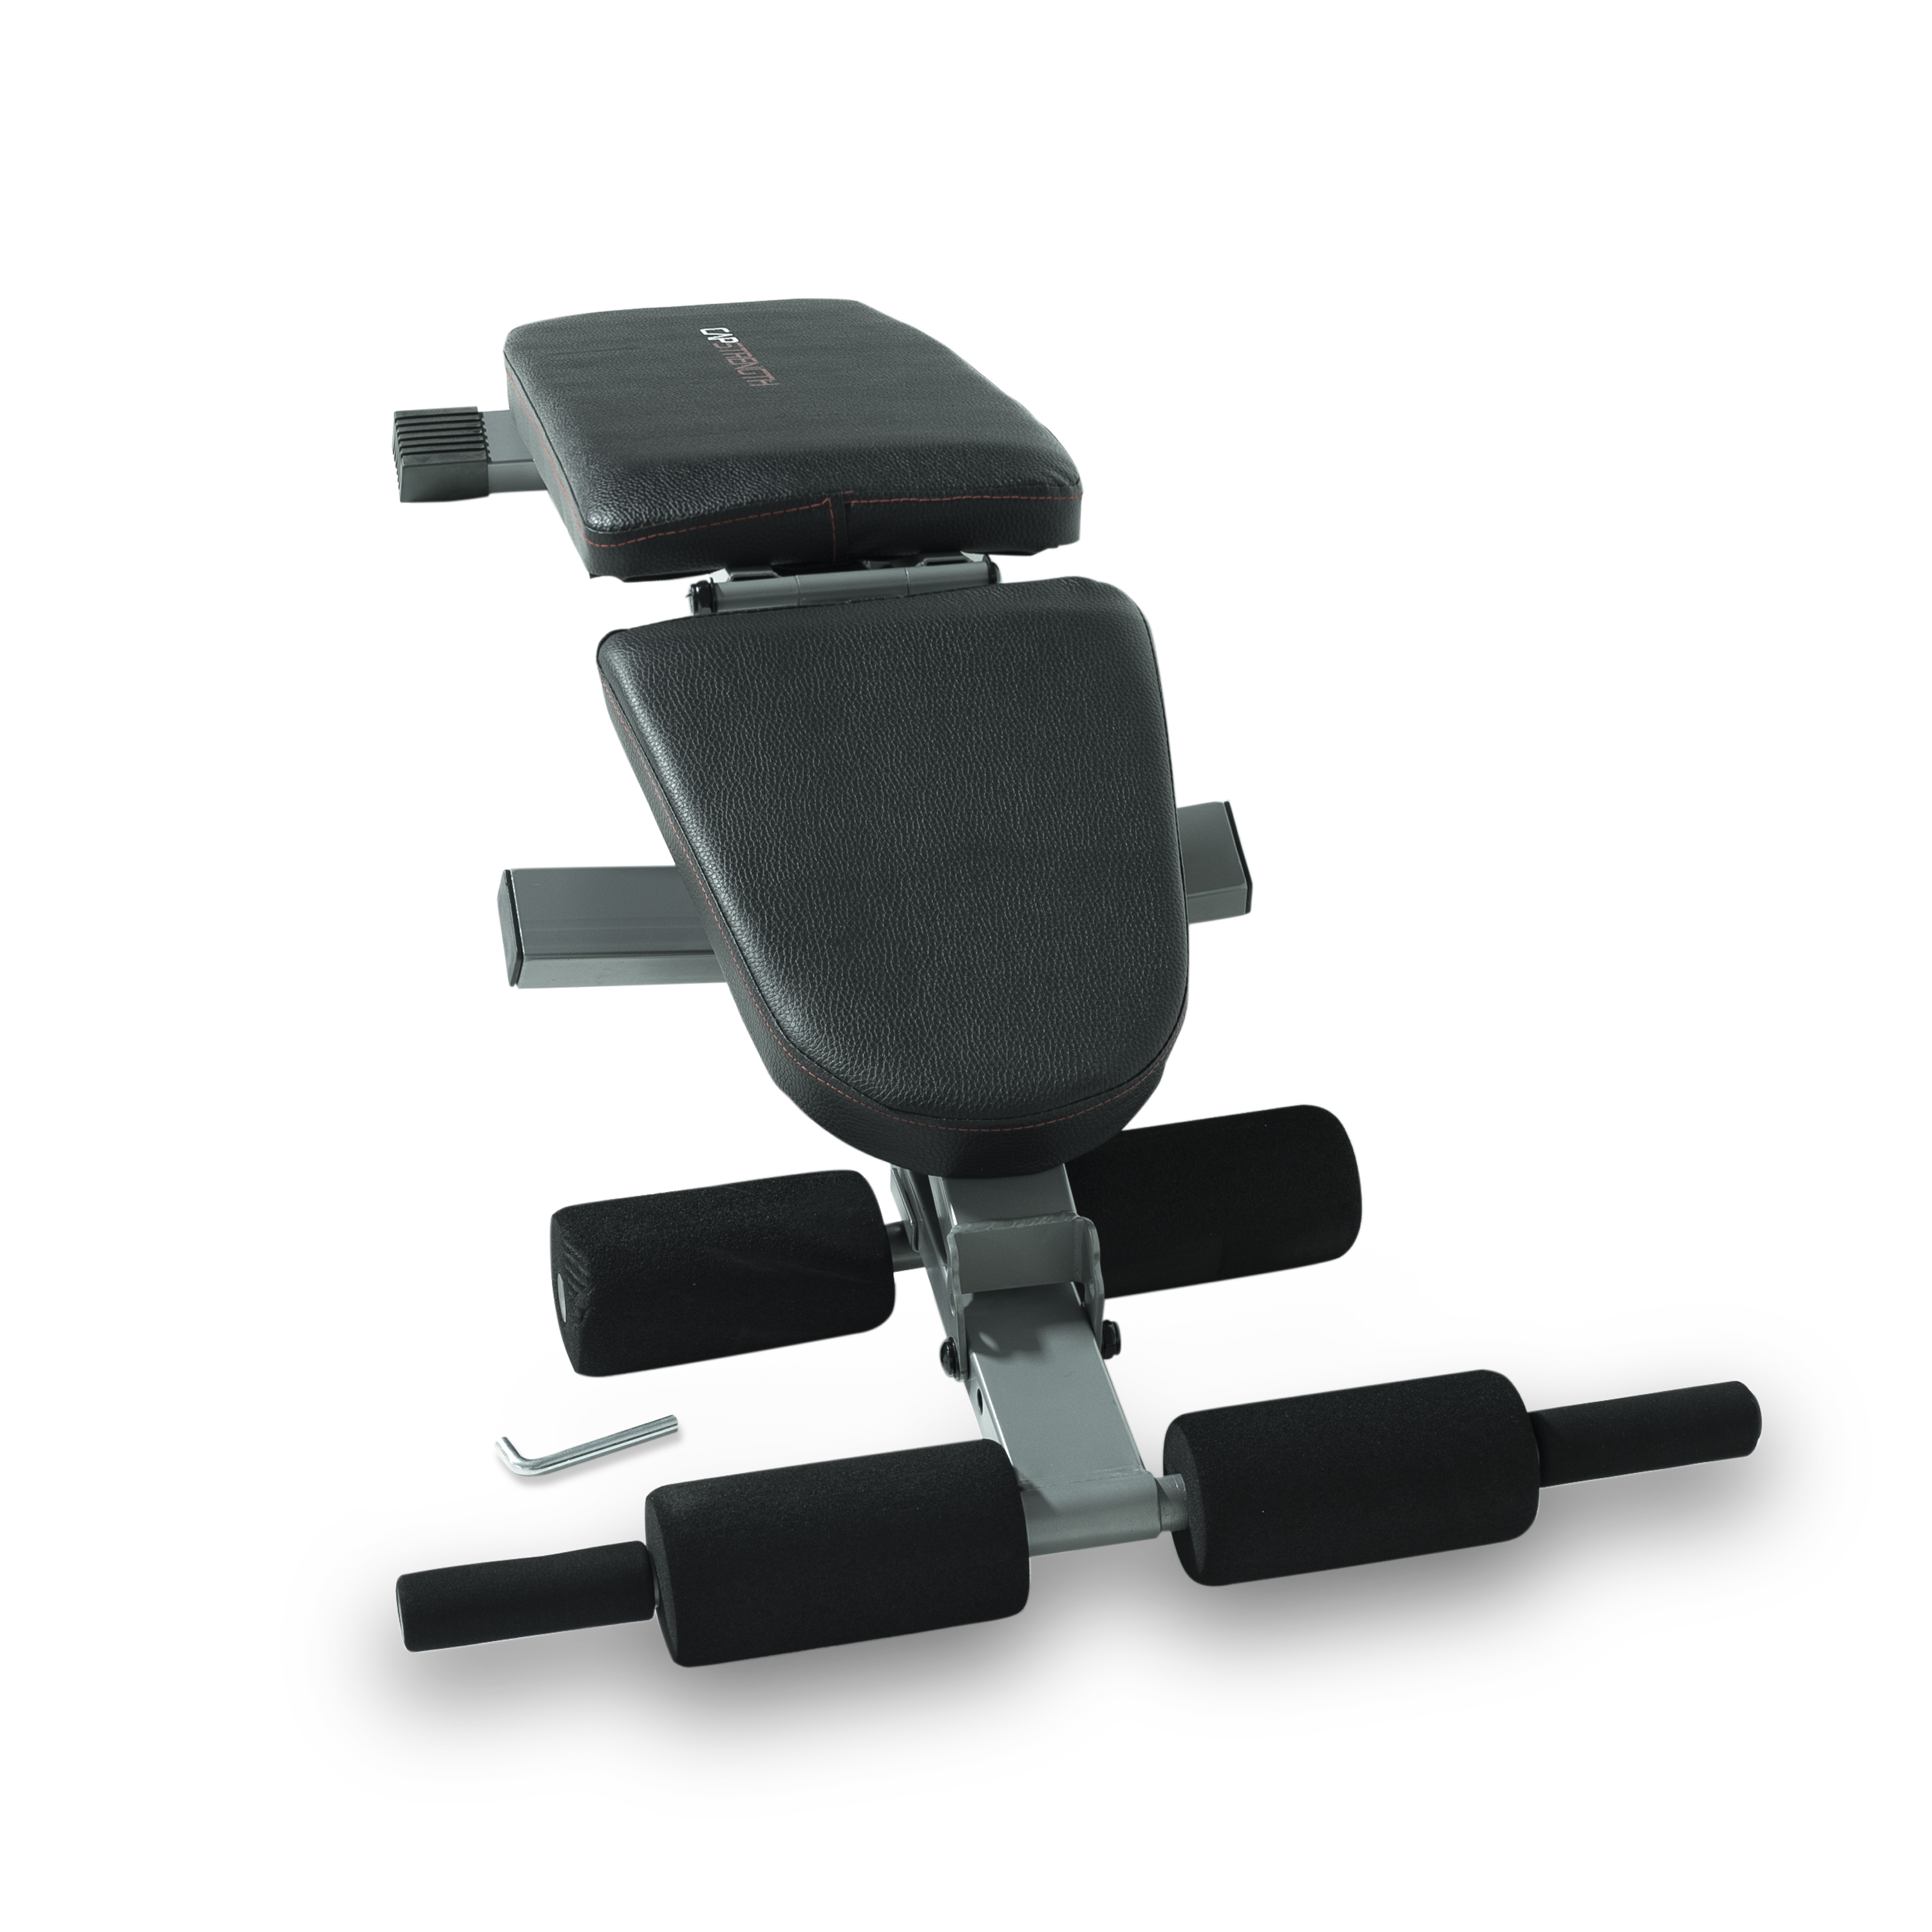 CAP Strength Adjustable FID Workout Bench (600 lb Weight Capacity), Black & Gray - image 7 of 10